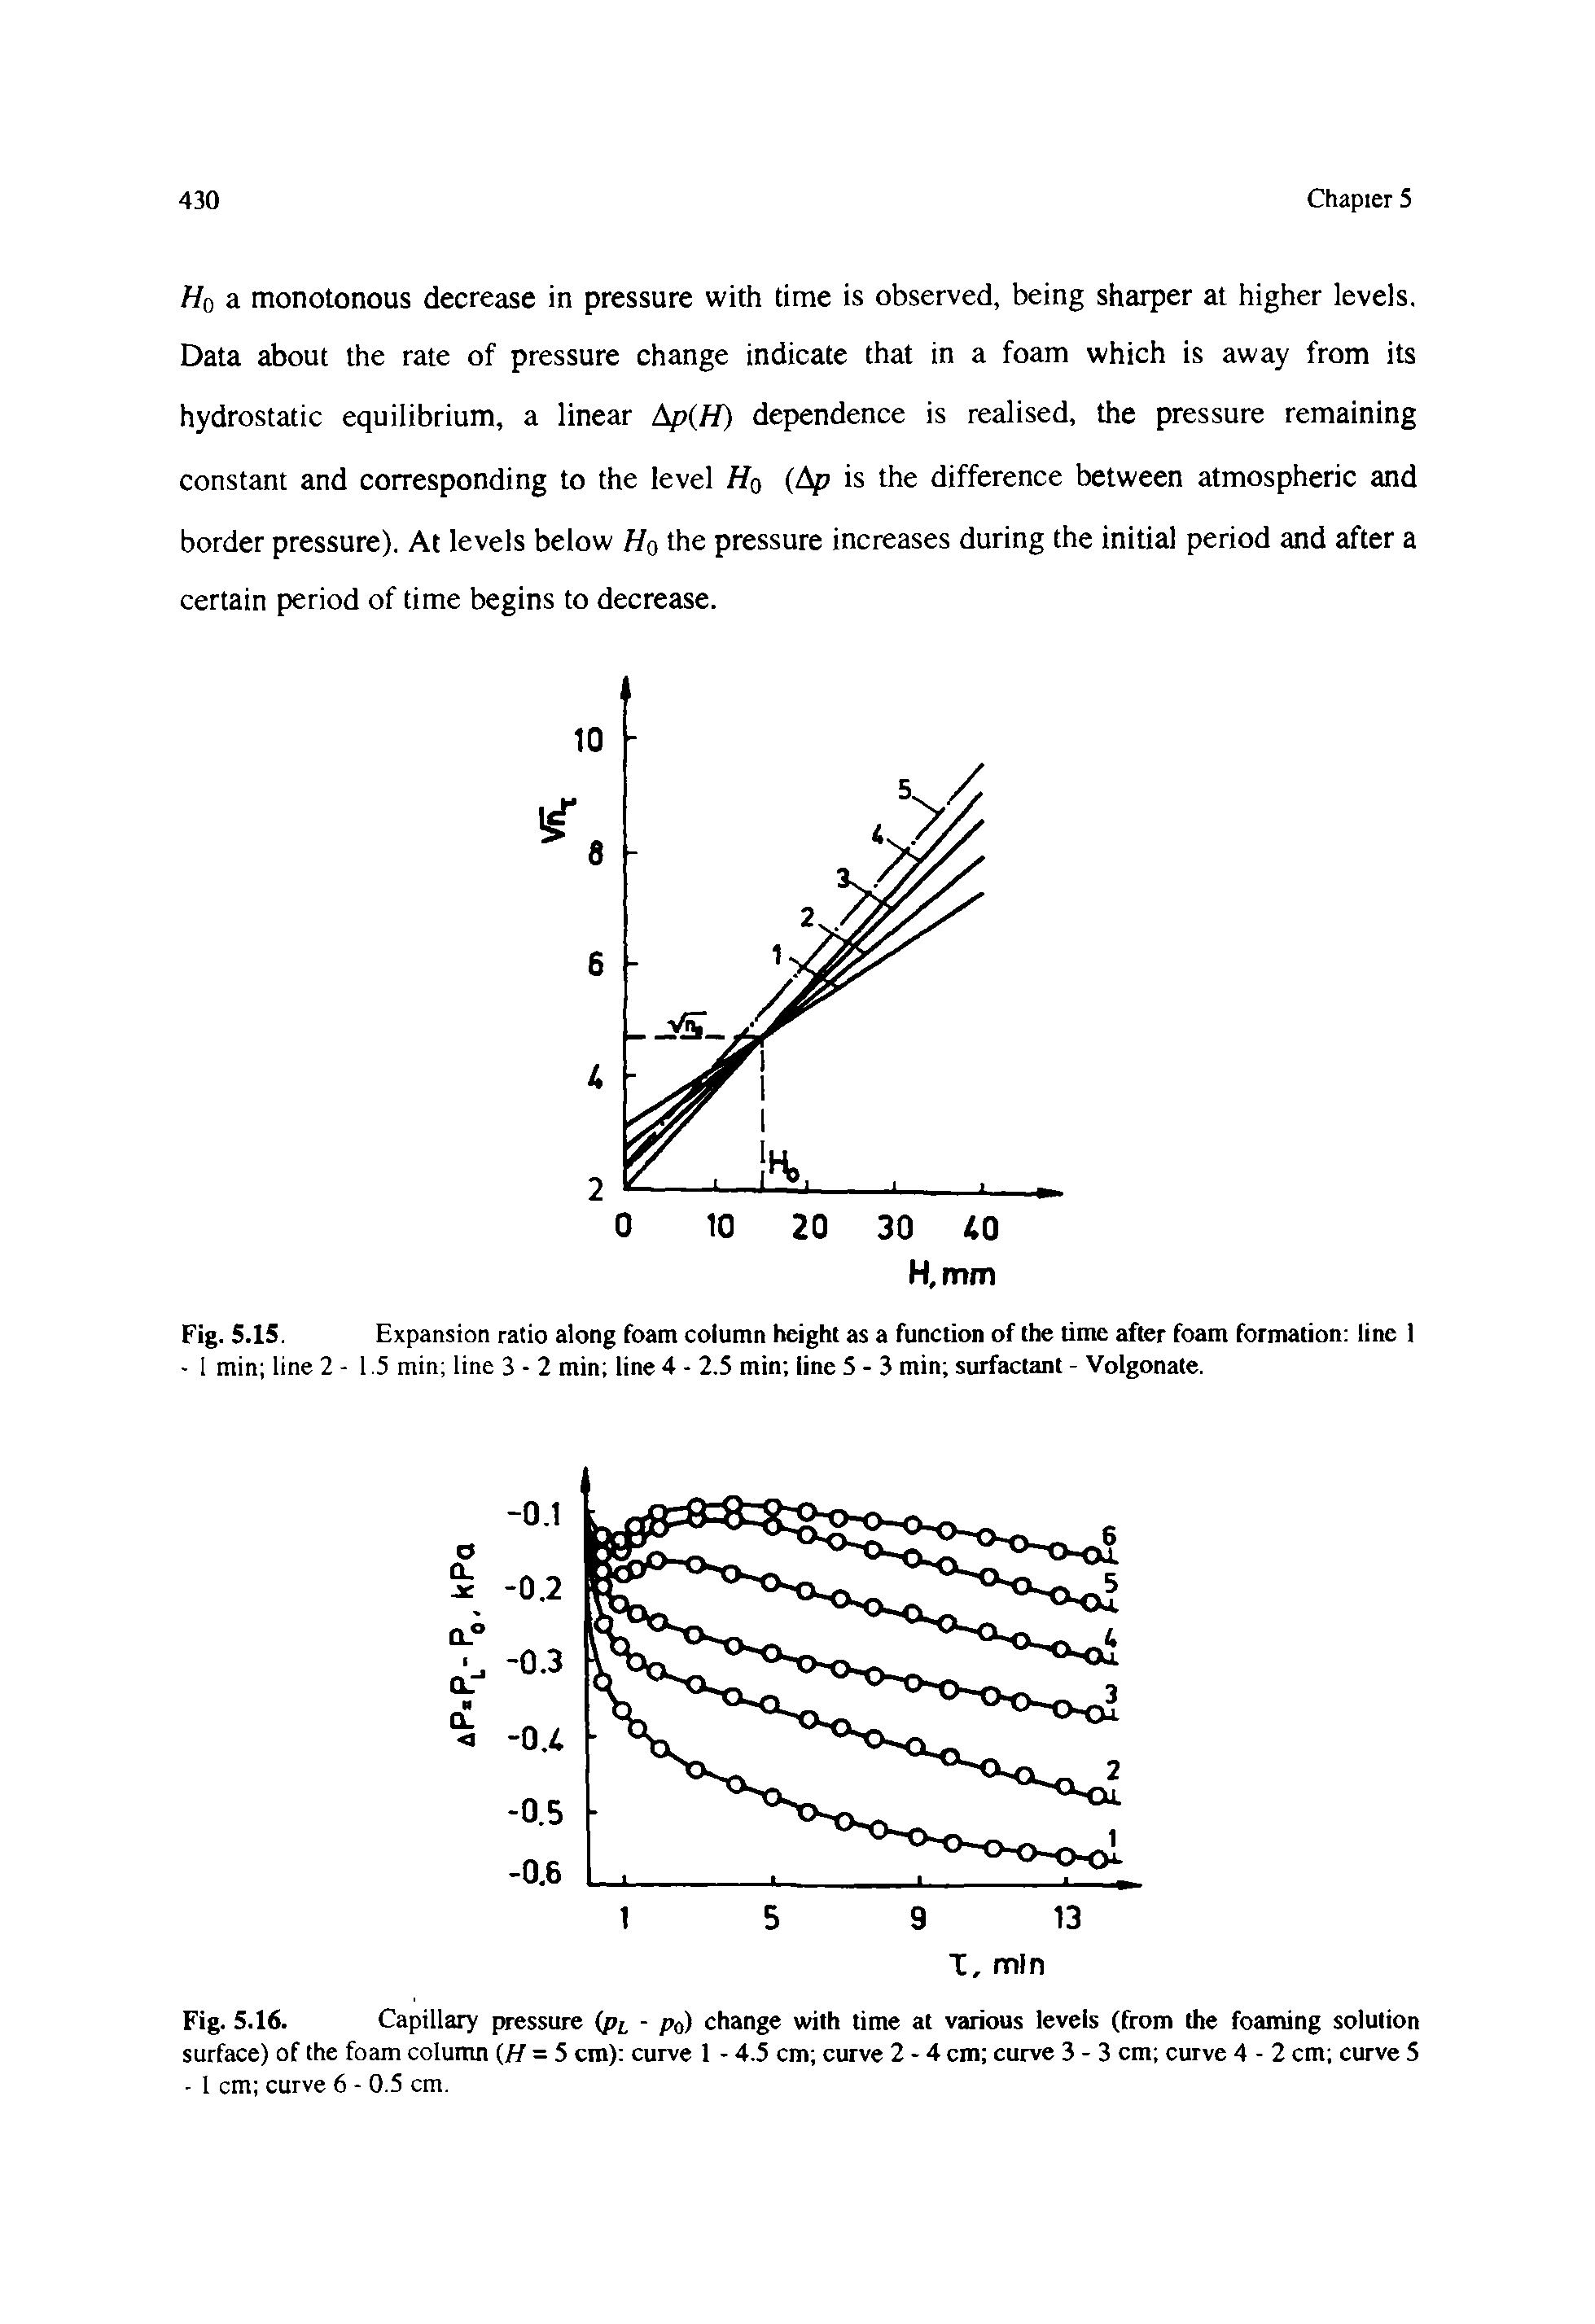 Fig. 5.15. Expansion ratio along foam column height as a function of the time after foam formation line 1...